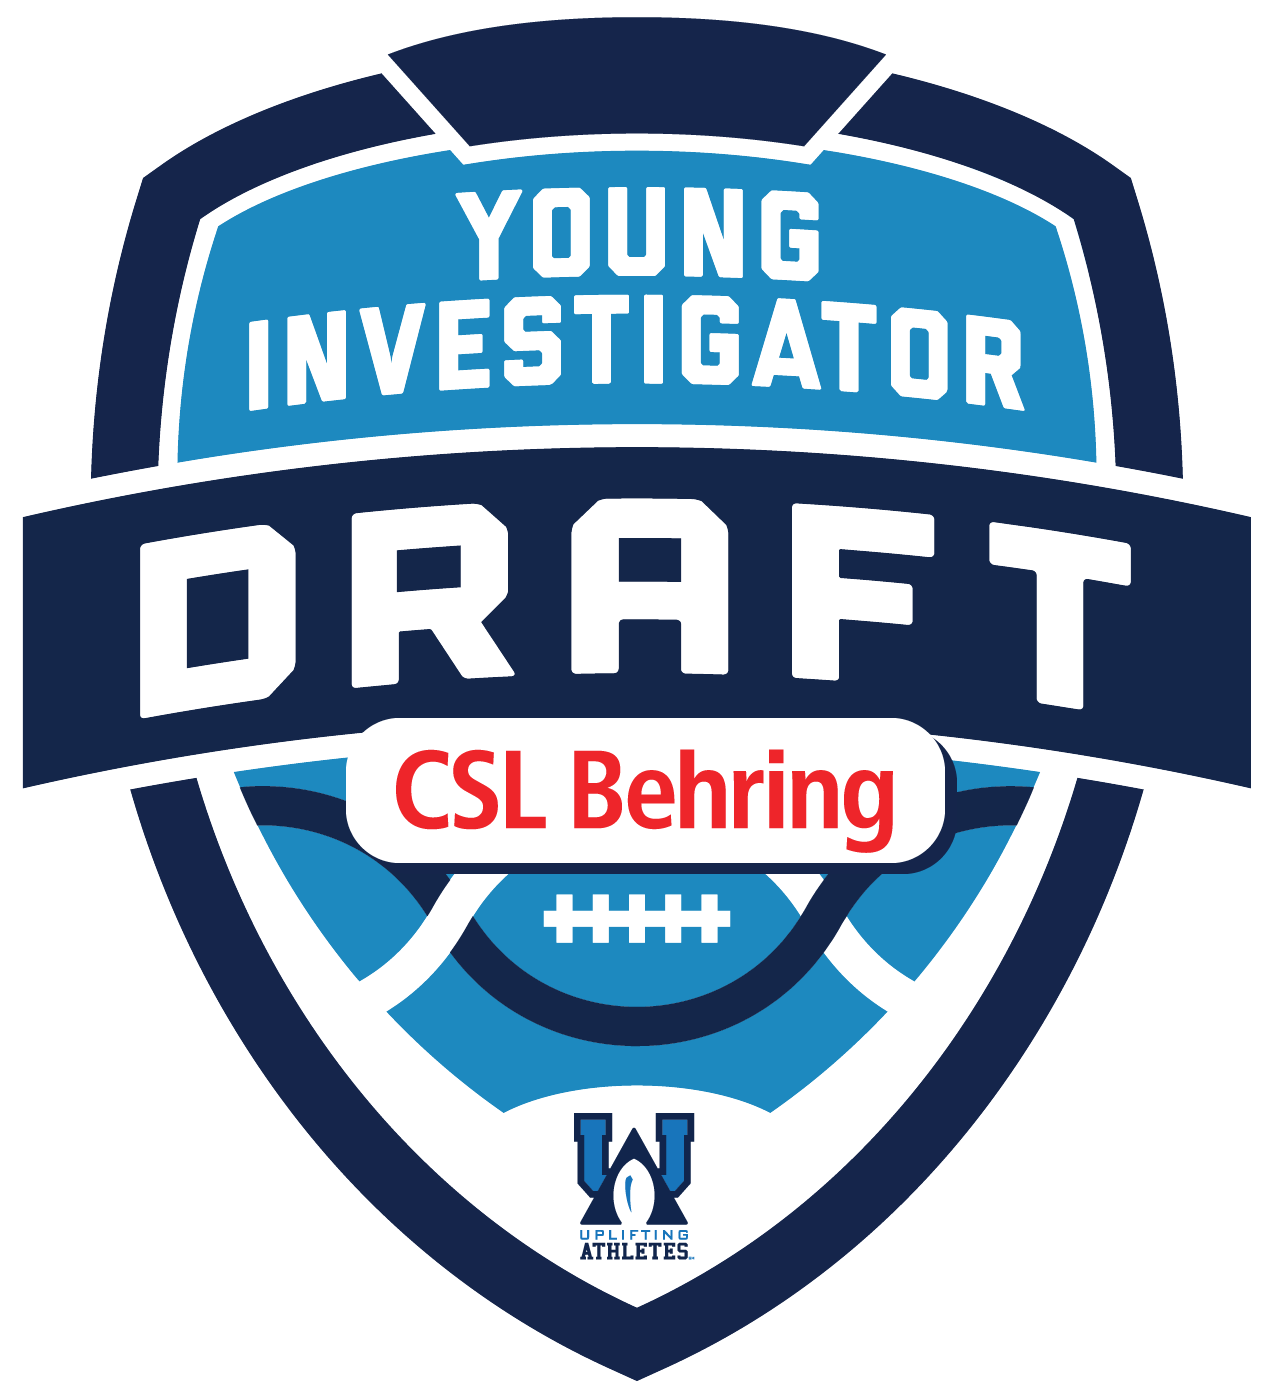 Uplifting Athletes Young Investigator Draft Presented by CSL Behring